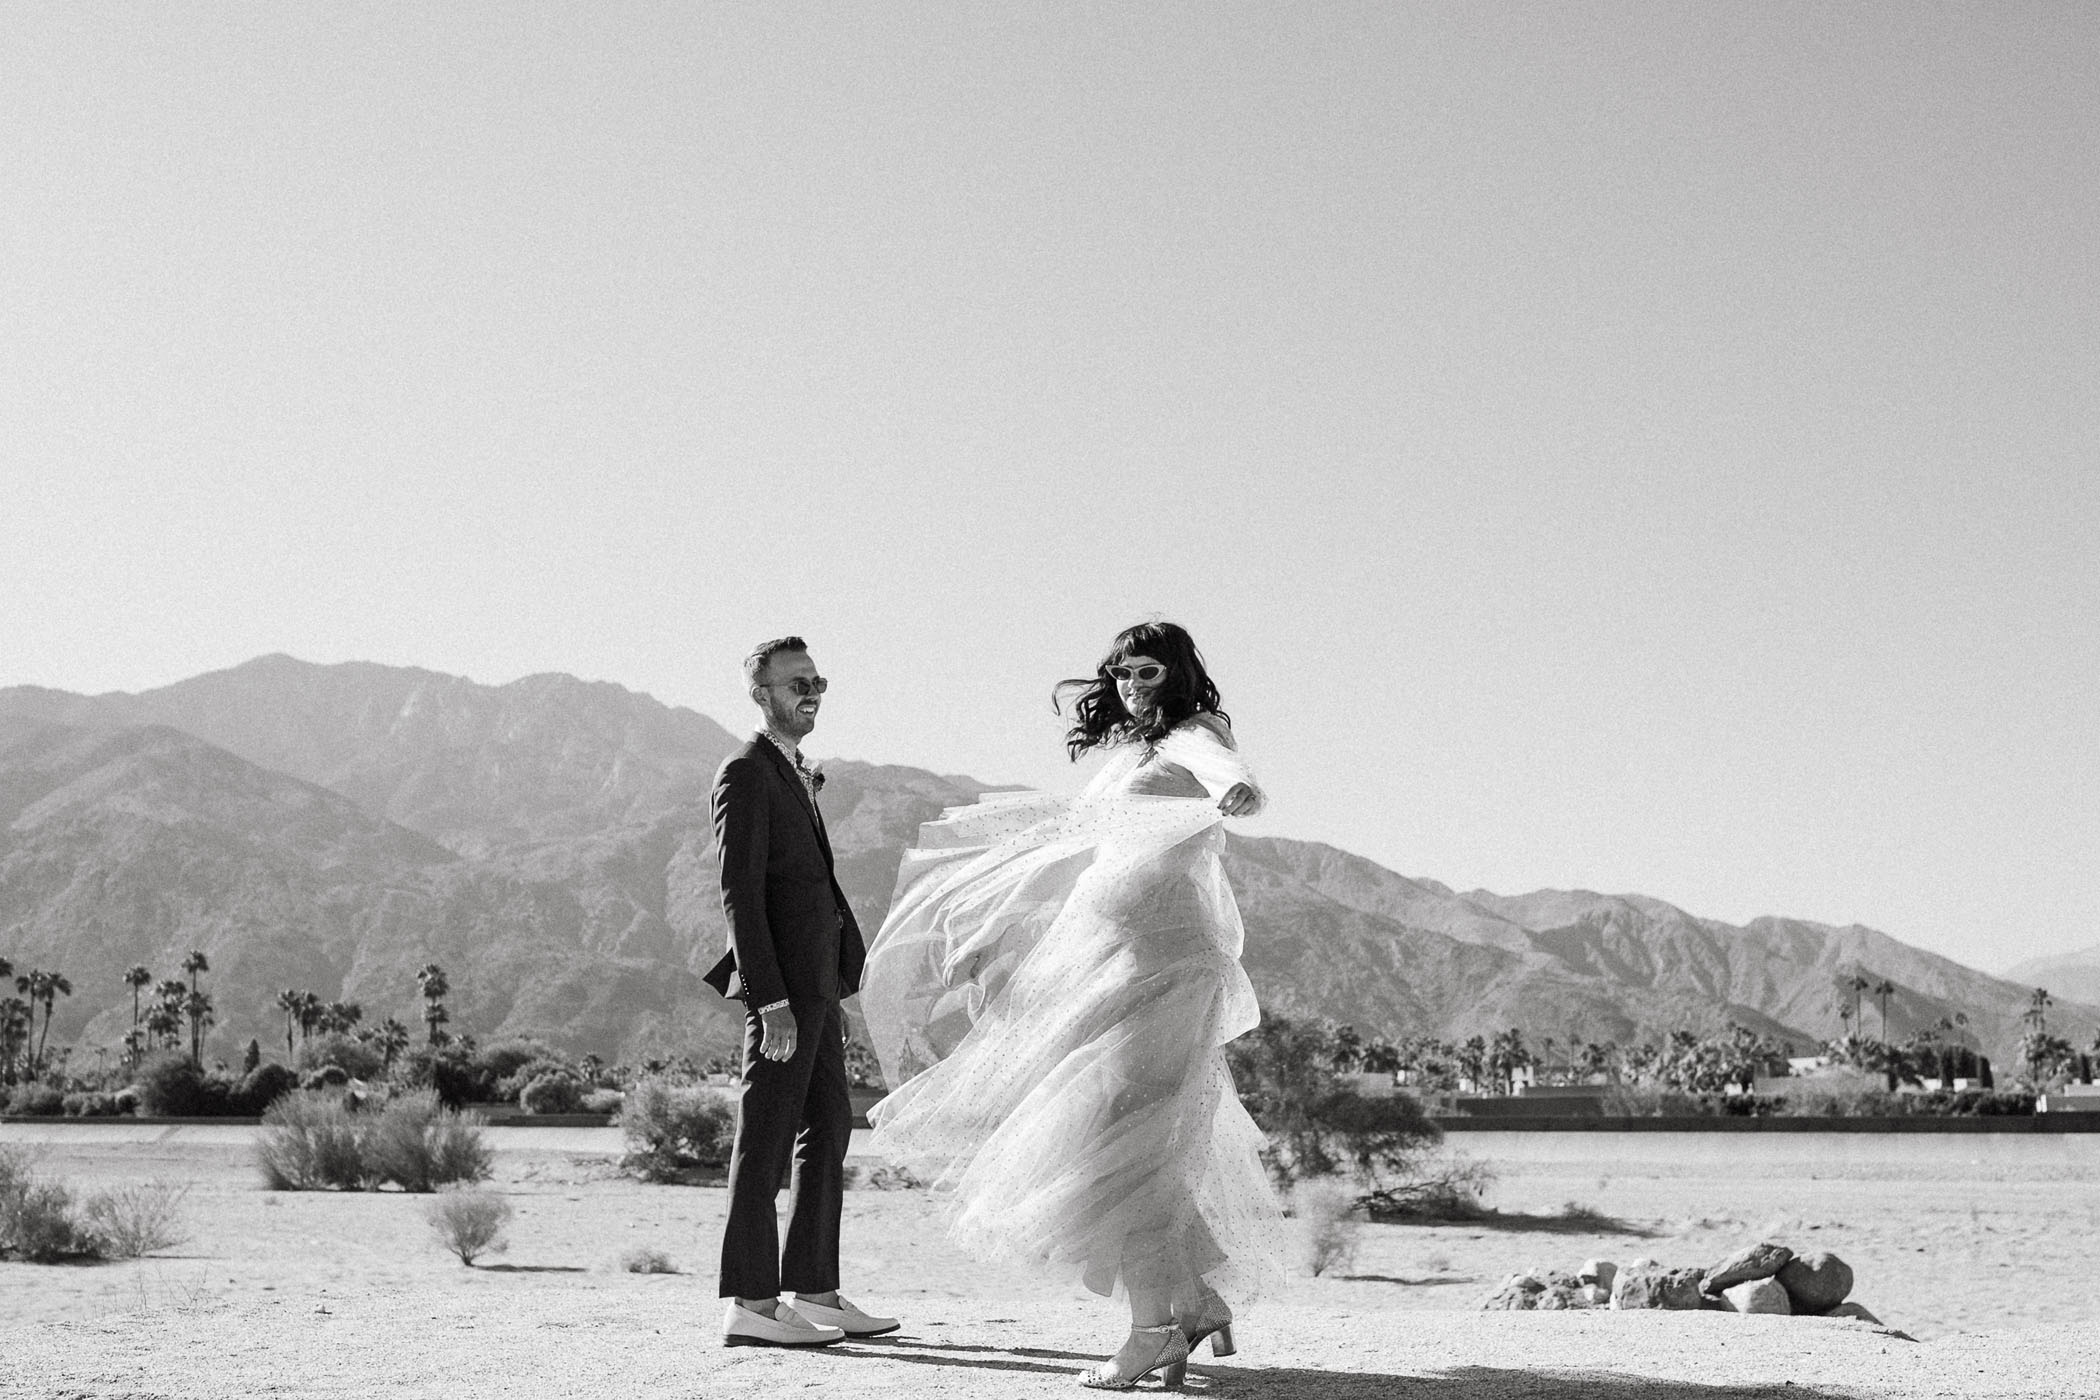 Becca & Nils: Colorful, Funky Palm Springs Party